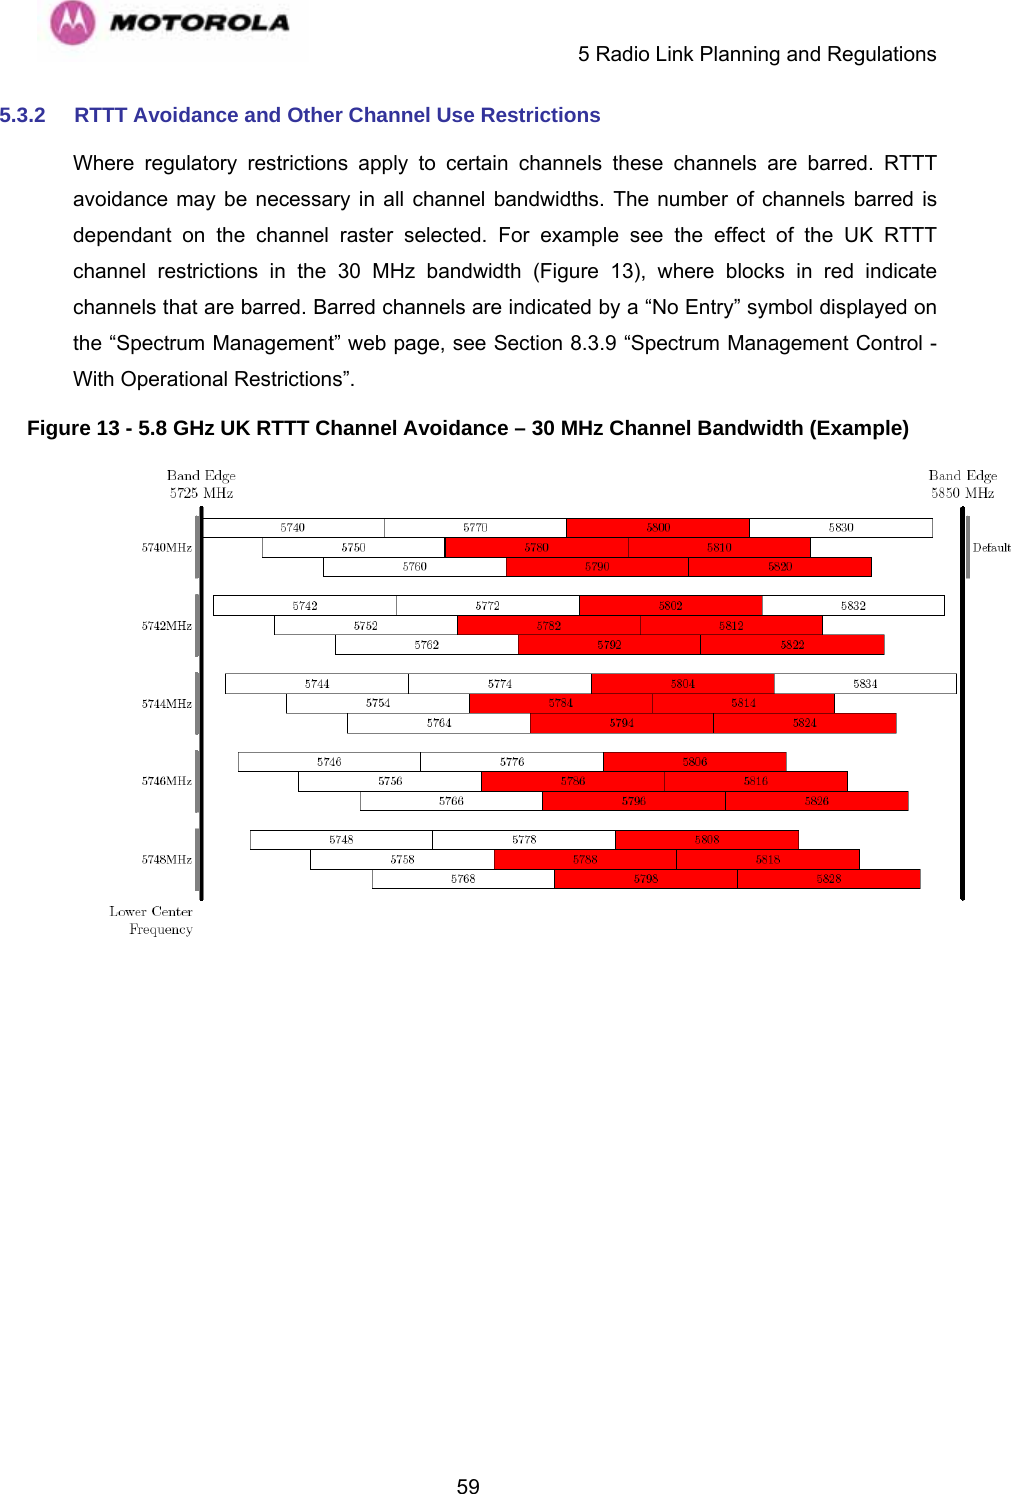     5 Radio Link Planning and Regulations  595.3.2  RTTT Avoidance and Other Channel Use Restrictions Where regulatory restrictions apply to certain channels these channels are barred. RTTT avoidance may be necessary in all channel bandwidths. The number of channels barred is dependant on the channel raster selected. For example see the effect of the UK RTTT channel restrictions in the 30 MHz bandwidth (Figure 13), where blocks in red indicate channels that are barred. Barred channels are indicated by a “No Entry” symbol displayed on the “Spectrum Management” web page, see Section 8.3.9 “Spectrum Management Control - With Operational Restrictions”. Figure 13 - 5.8 GHz UK RTTT Channel Avoidance – 30 MHz Channel Bandwidth (Example)  